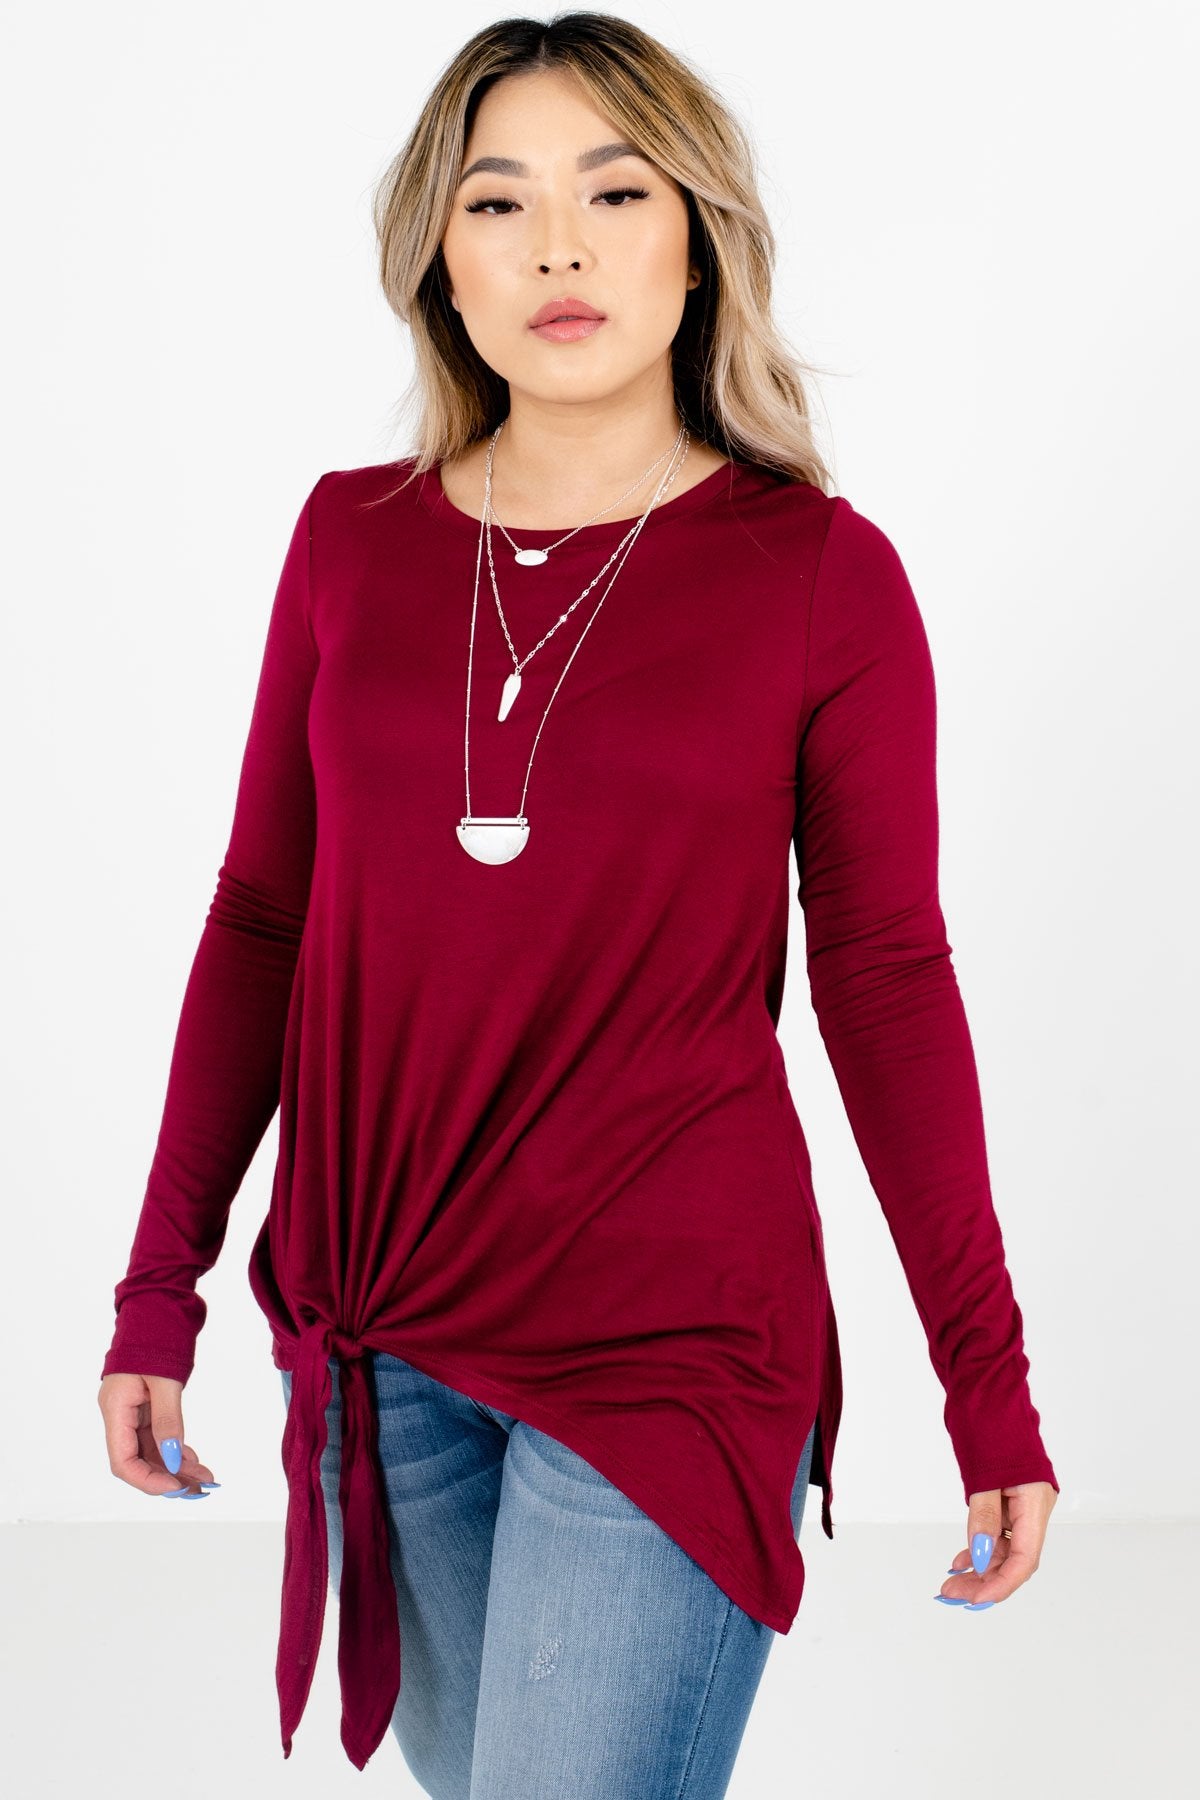 Women's Burgundy Casual Everyday Boutique Tops